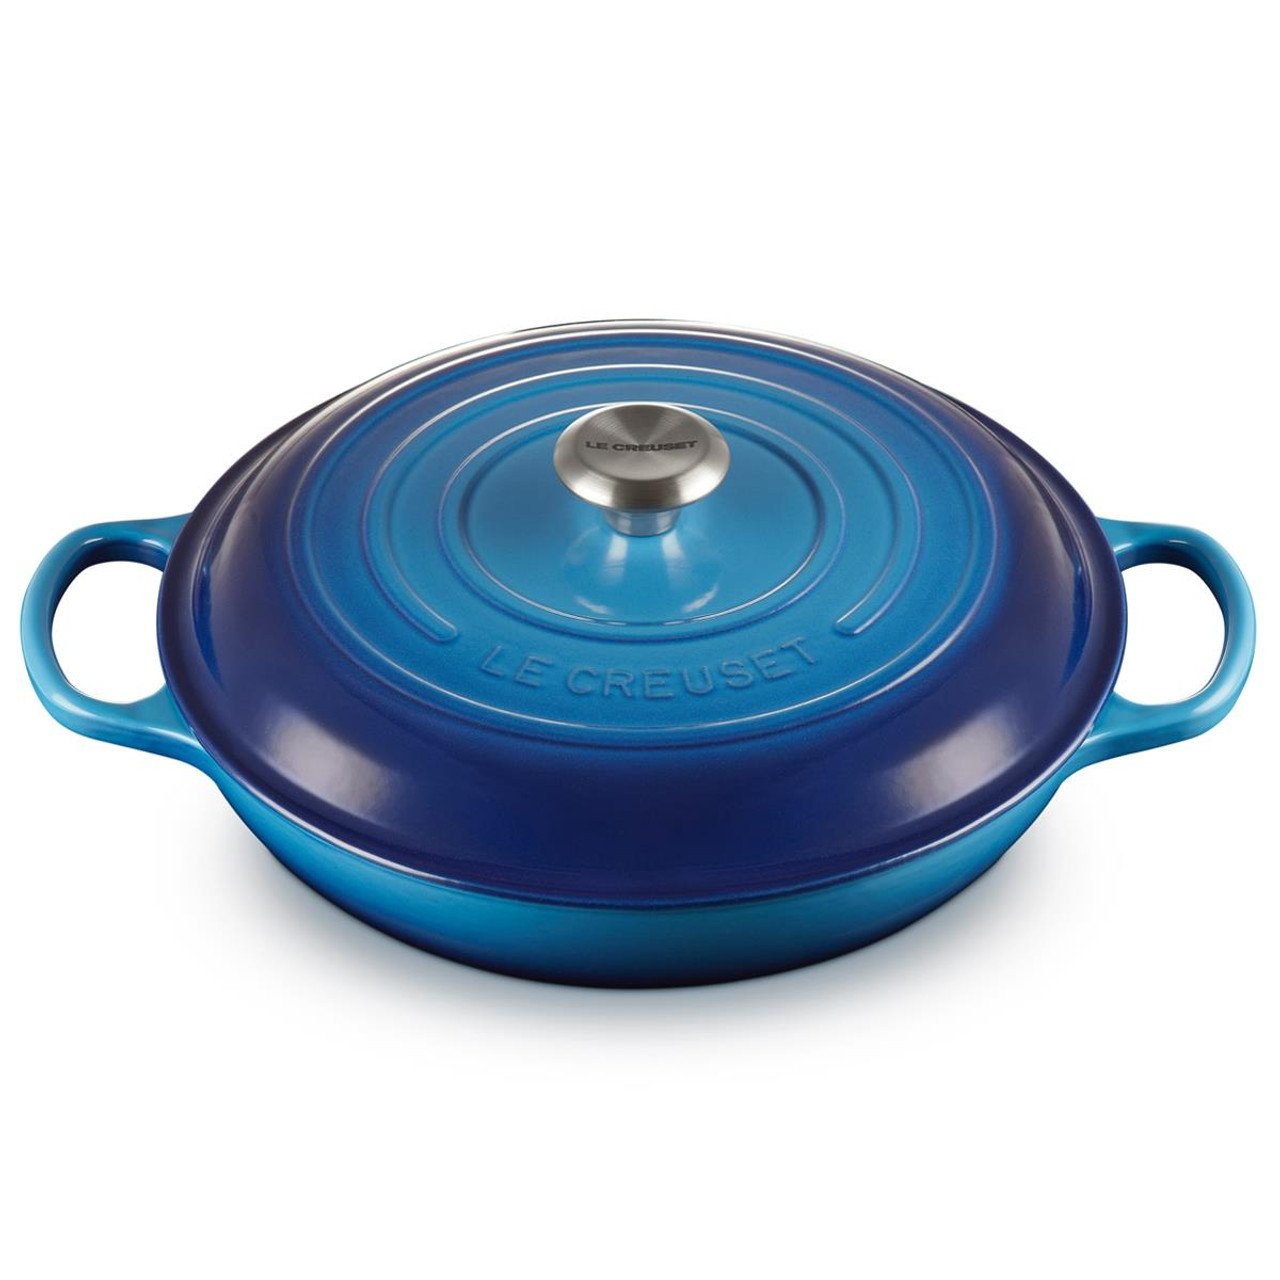 How can the lid be utilized with the Le Creuset shallow casserole?